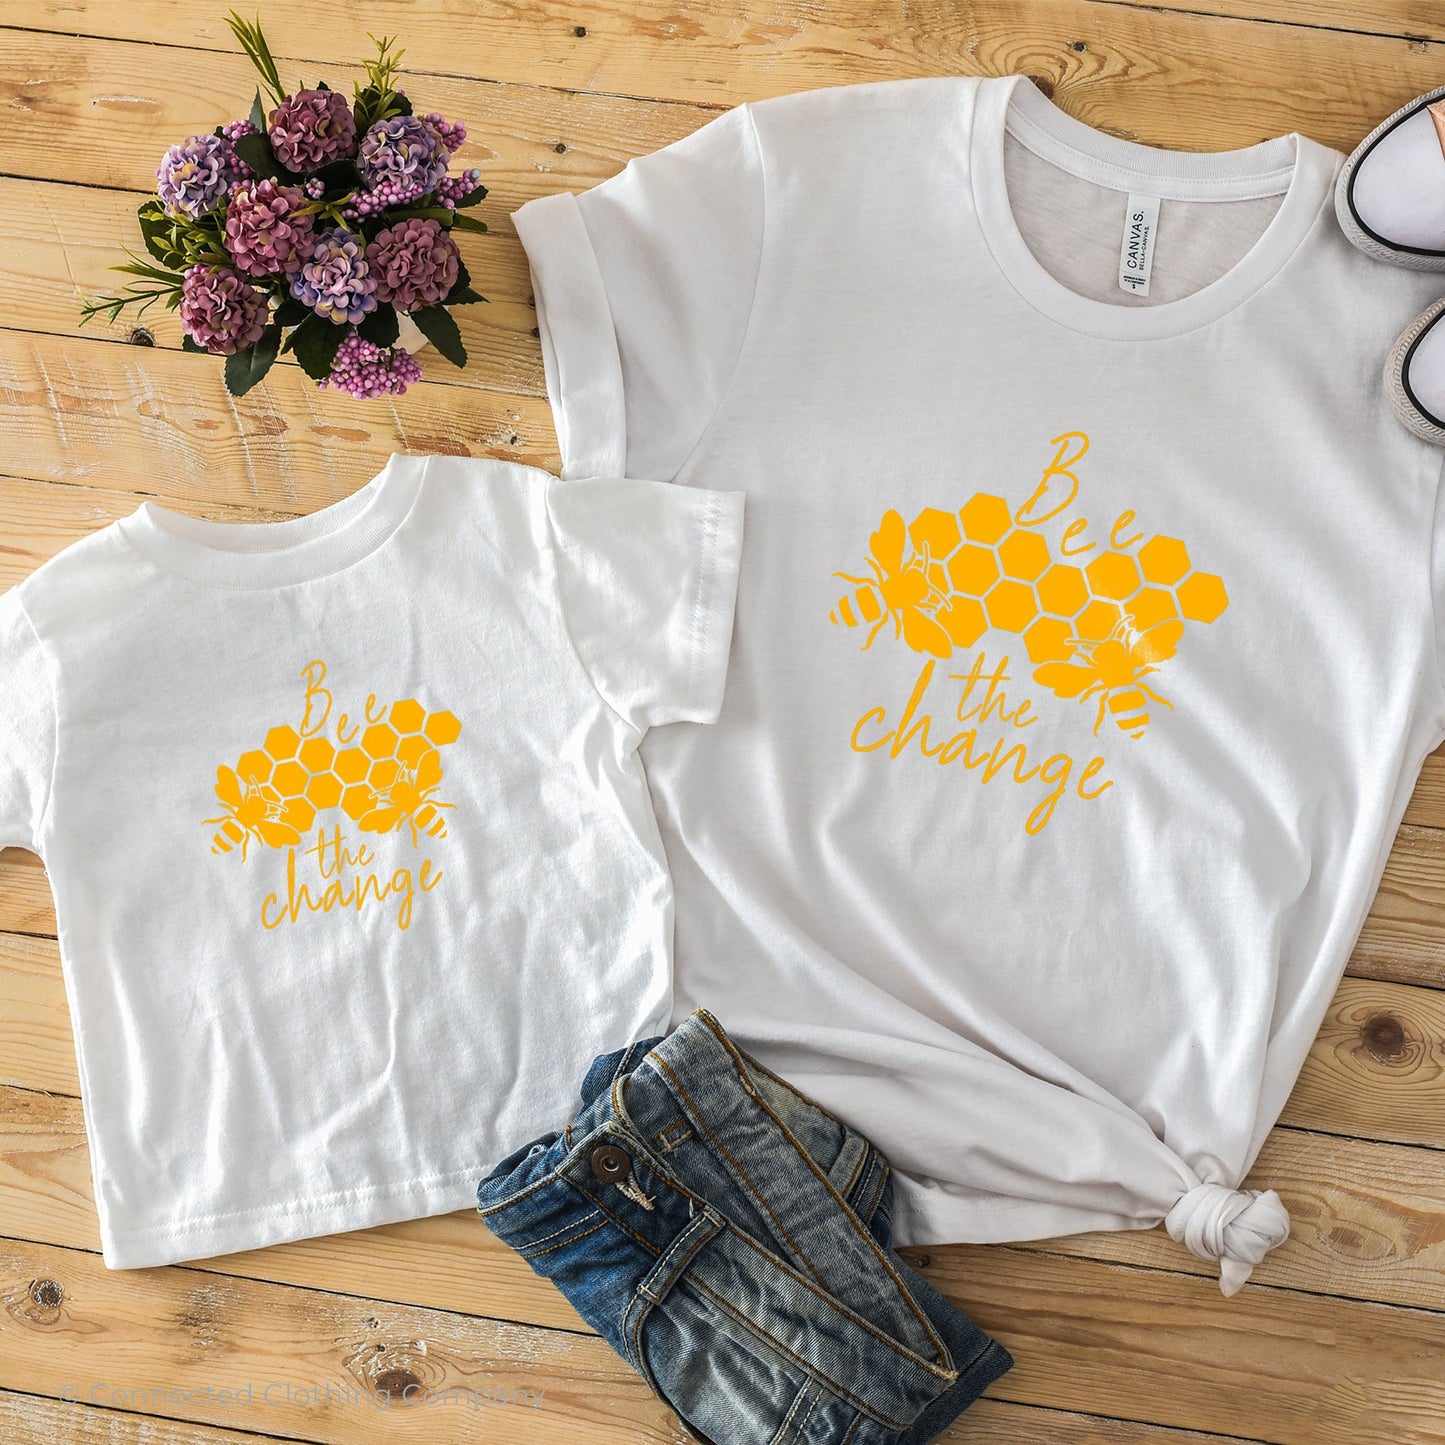 Bee The Change Toddler Short-Sleeve Tee in White with Adult Bee The Change Tee - Connected Clothing Company - 10% of profits donated to The Honeybee Conservancy, supporting bee conservation and building bee habitats